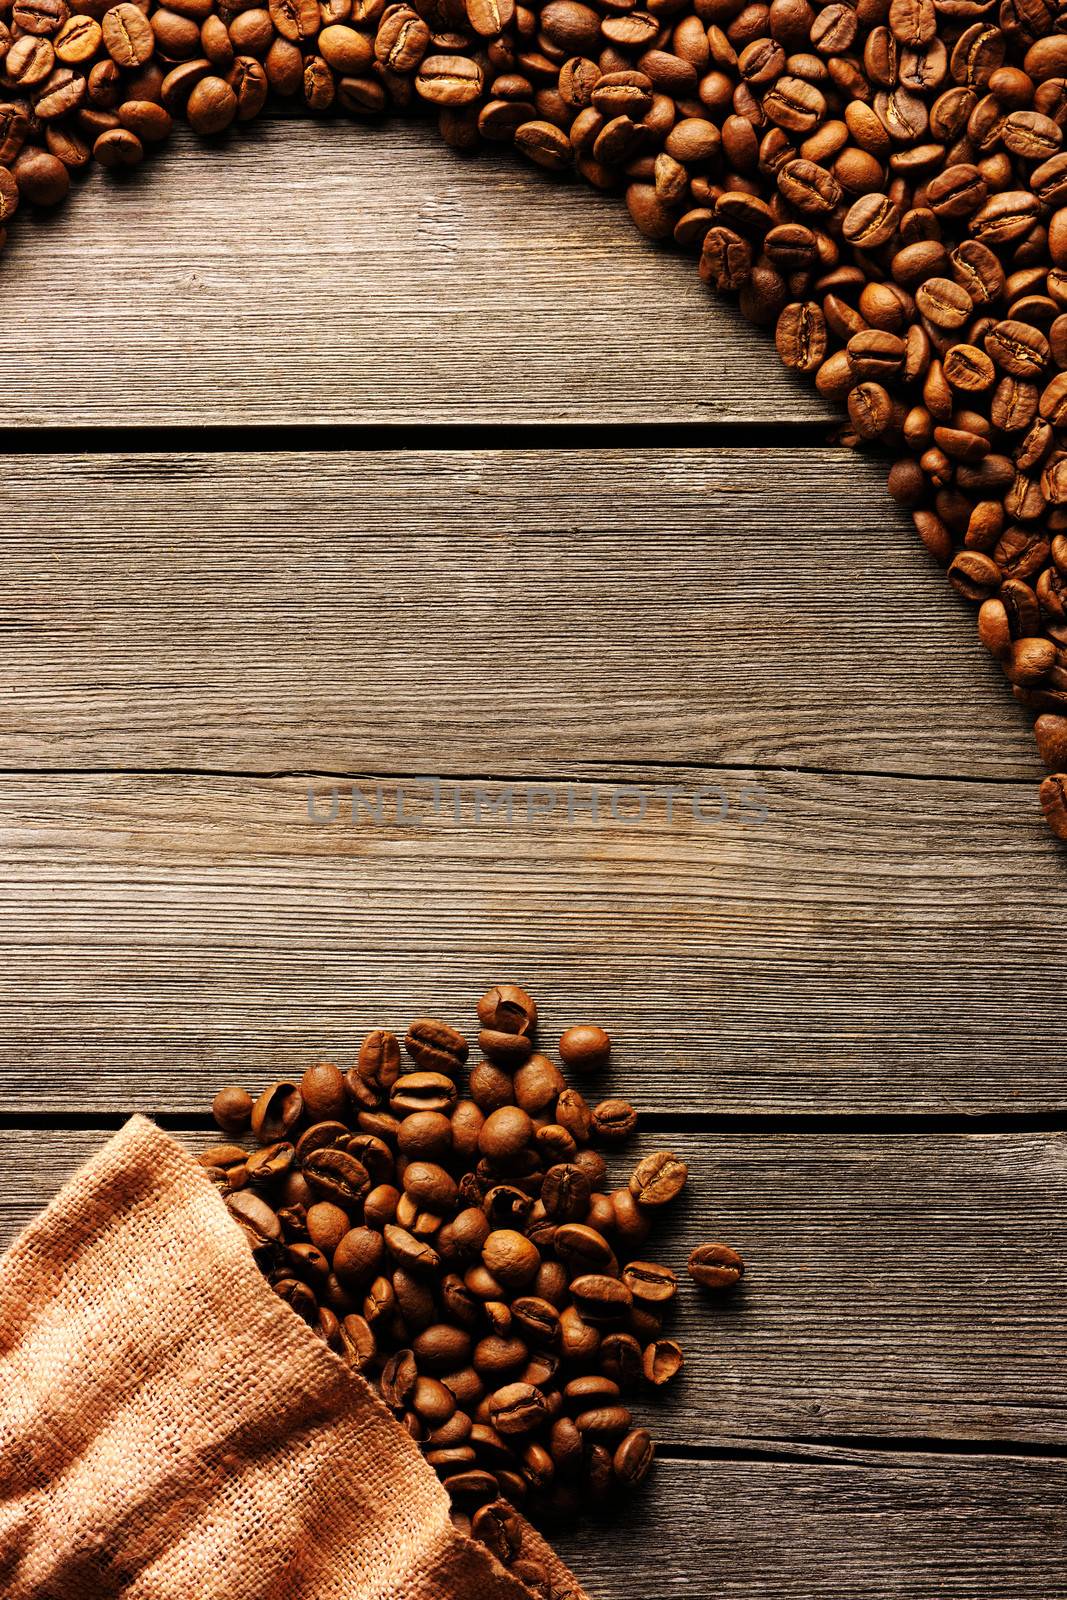 Coffee beans and bag background by haveseen